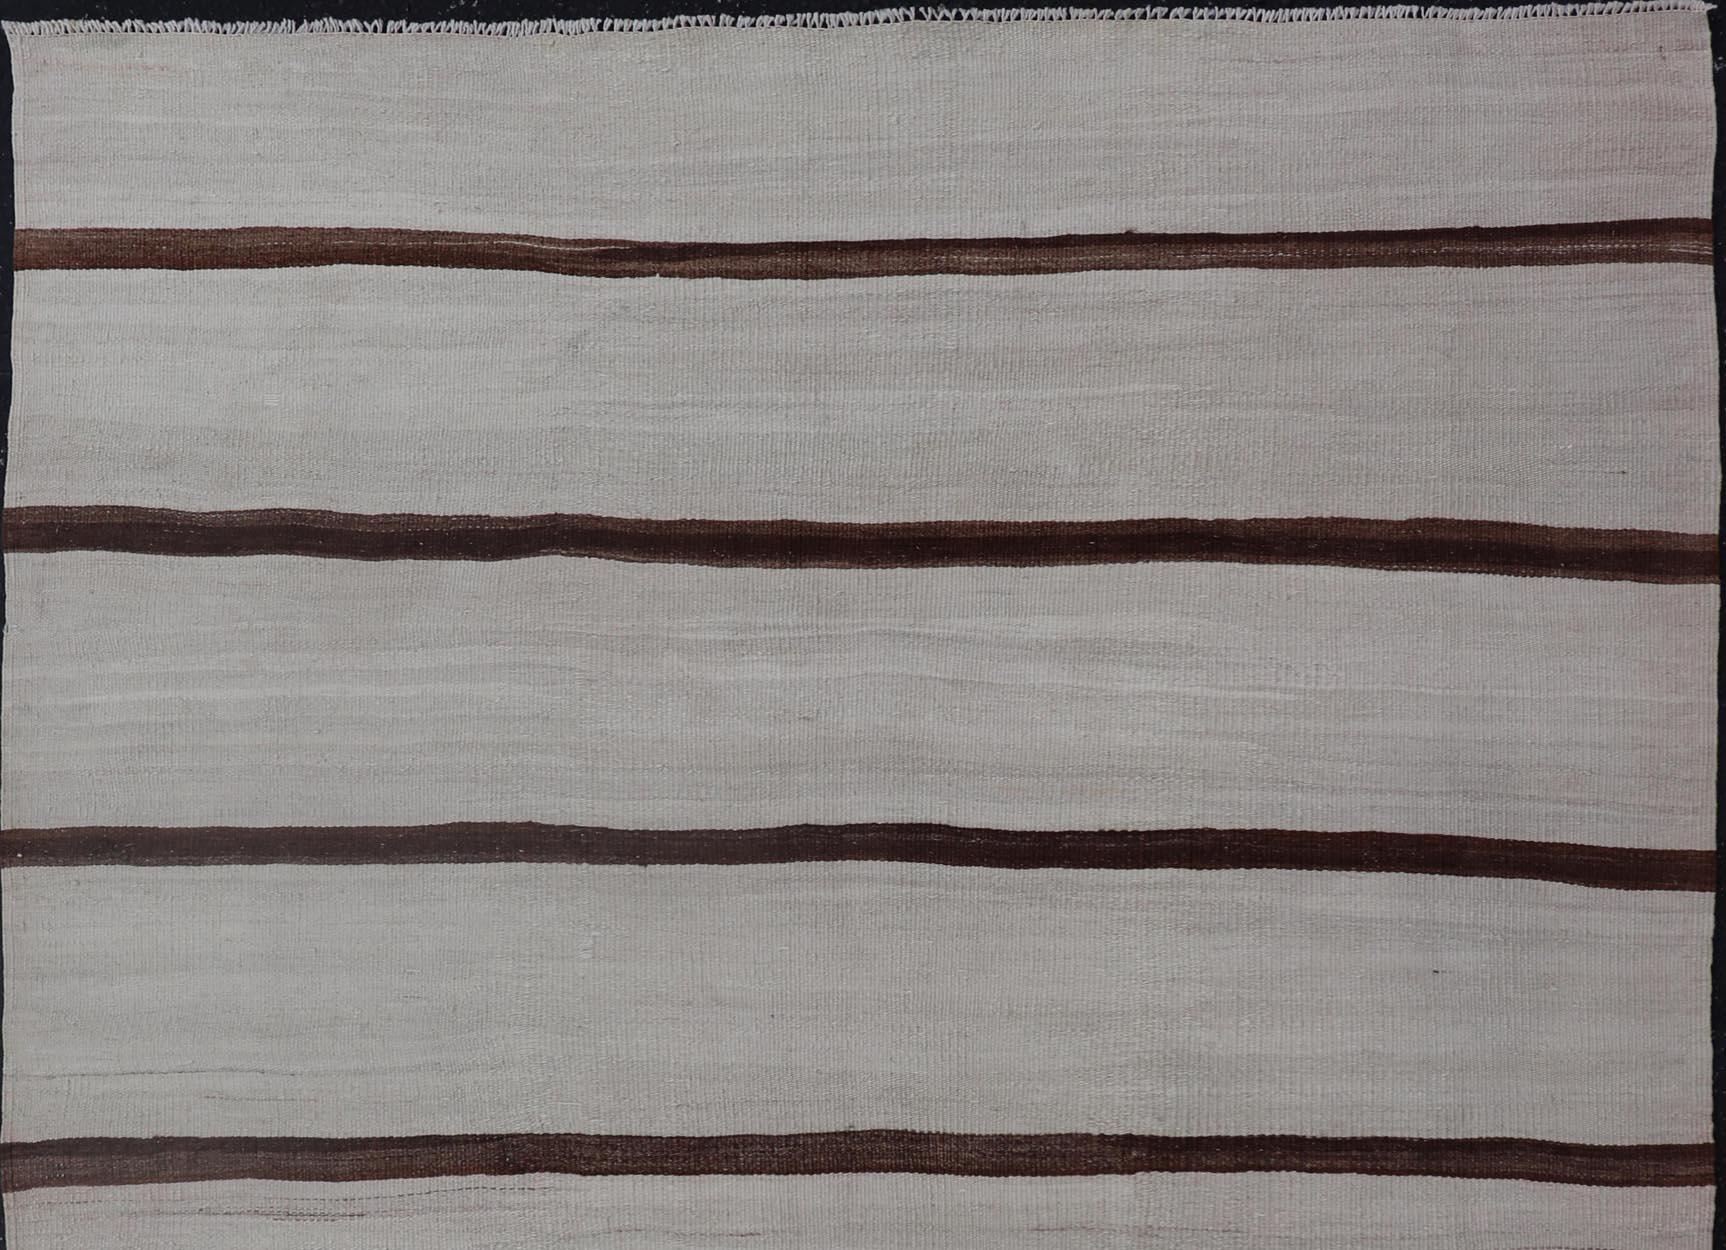 Turkish Vintage Kilim in Shades of Brown and Ivory with Stripe Design. Keivan Woven Arts / rug EN-15170, country of origin / type: Turkey / Kilim, circa 1950
Measures: 4'2 x 5'0 
This vintage striped design Turkish Kilim rendered in shade of browns